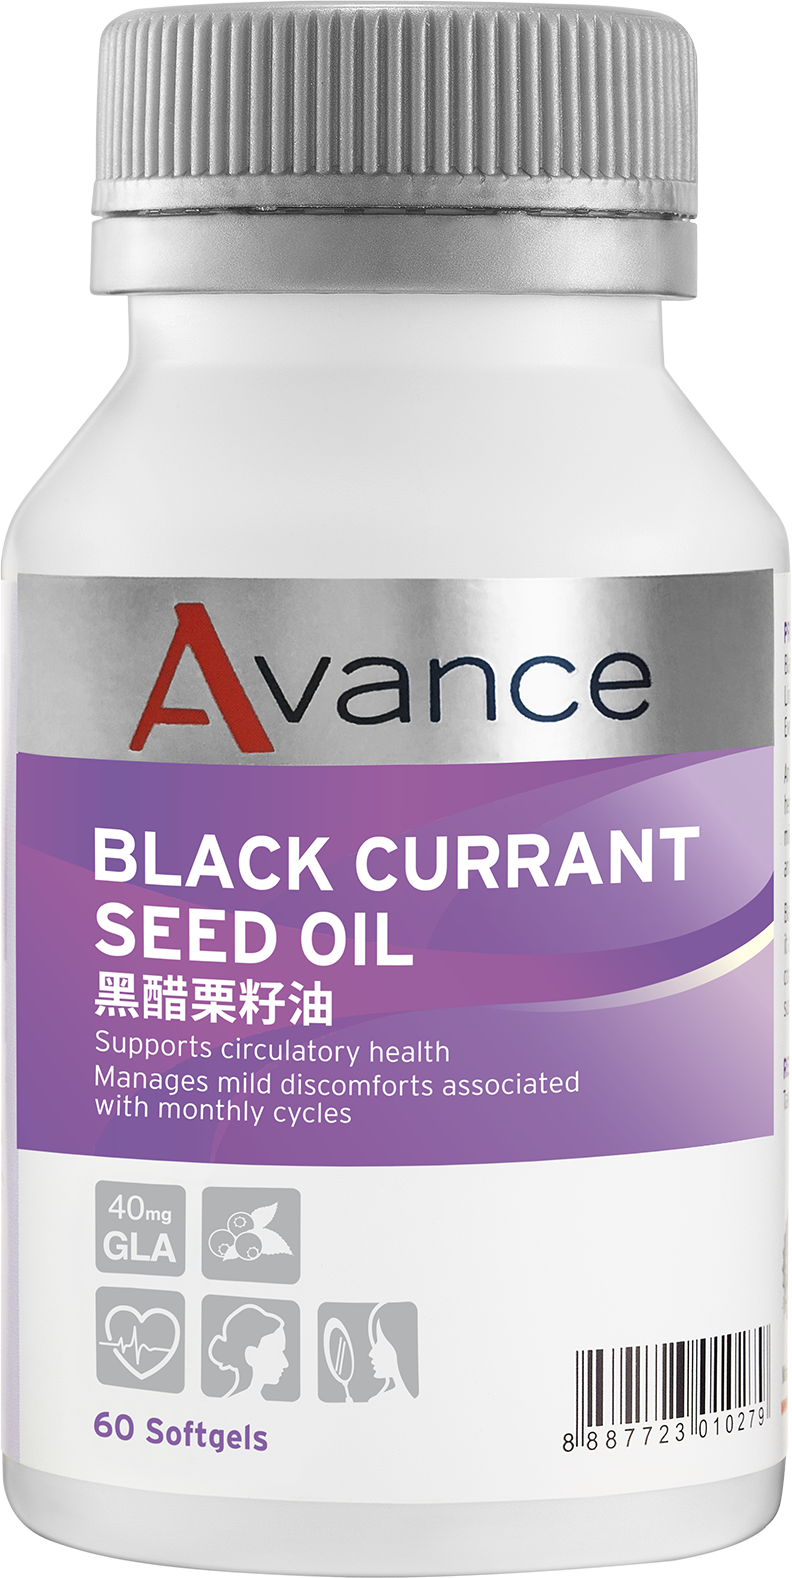 Black Currant Seed Oil | Essential Source of Omega-6 | Avance Product